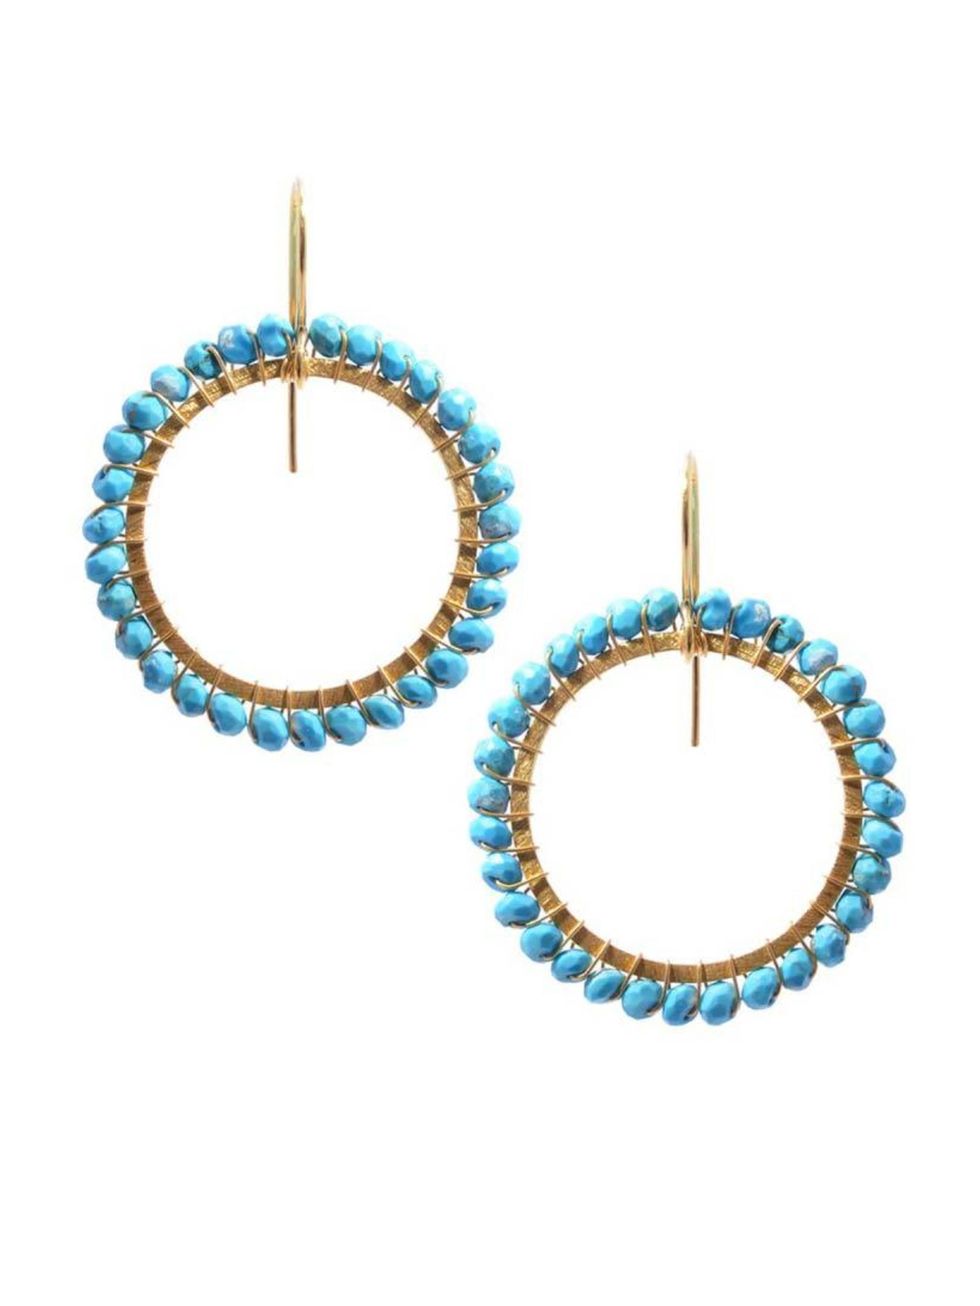 <p>Wear with denim and suede, but stop short of spurs. Unless you're a cowgirl. If you're a cowgirl, then the western trend is your (fringed) oyster.</p>

<p><a href="http://www.kirstengoss.com/shop-1/earrings/hoops/mia-vermeil-turquoise.html" target="_bl